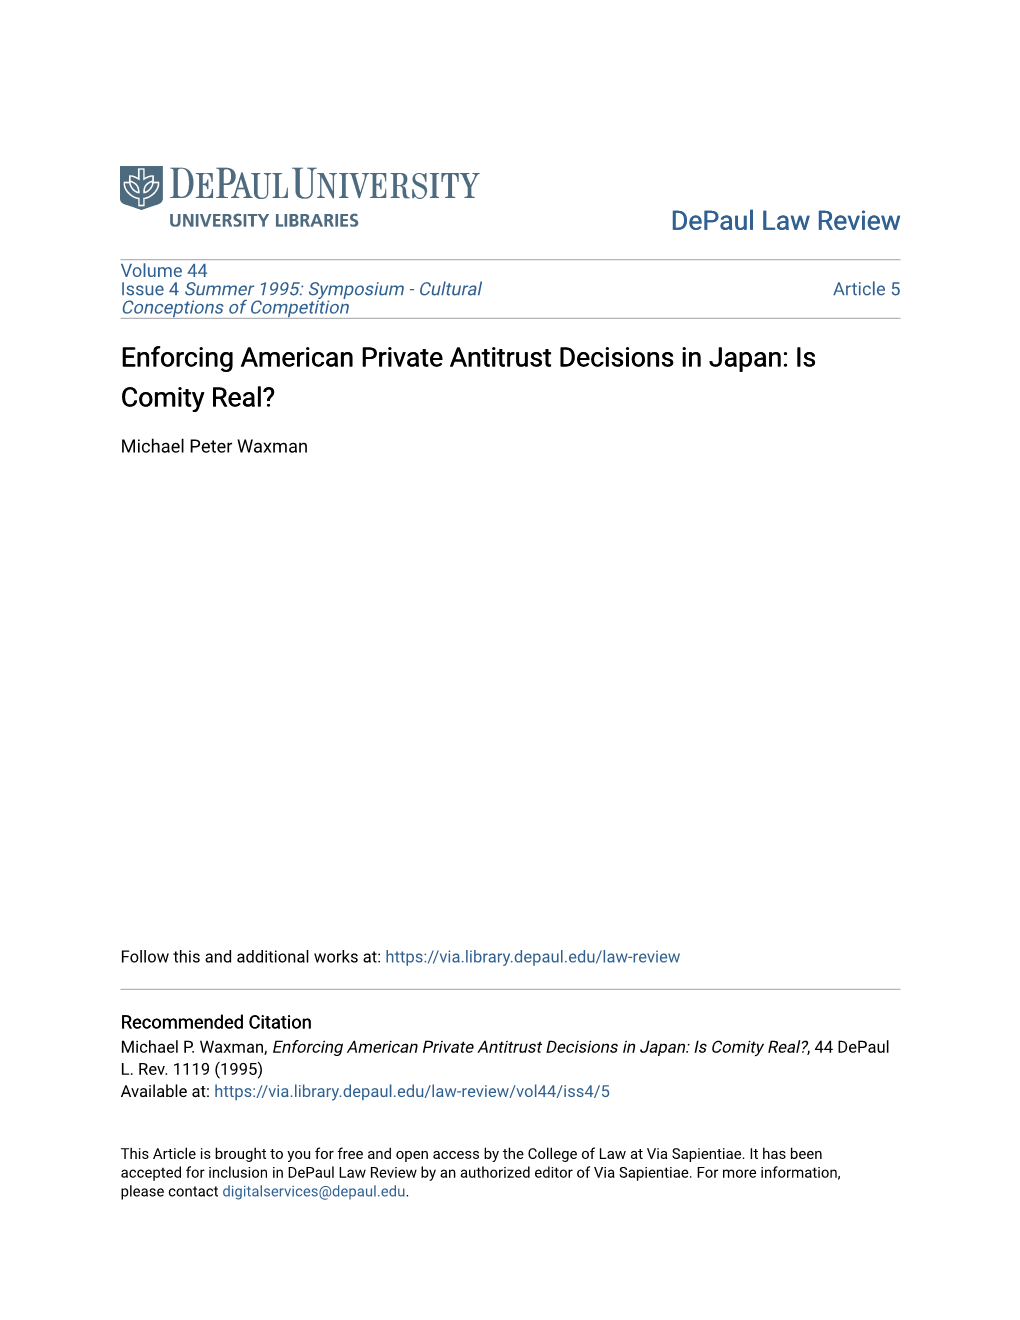 Enforcing American Private Antitrust Decisions in Japan: Is Comity Real?